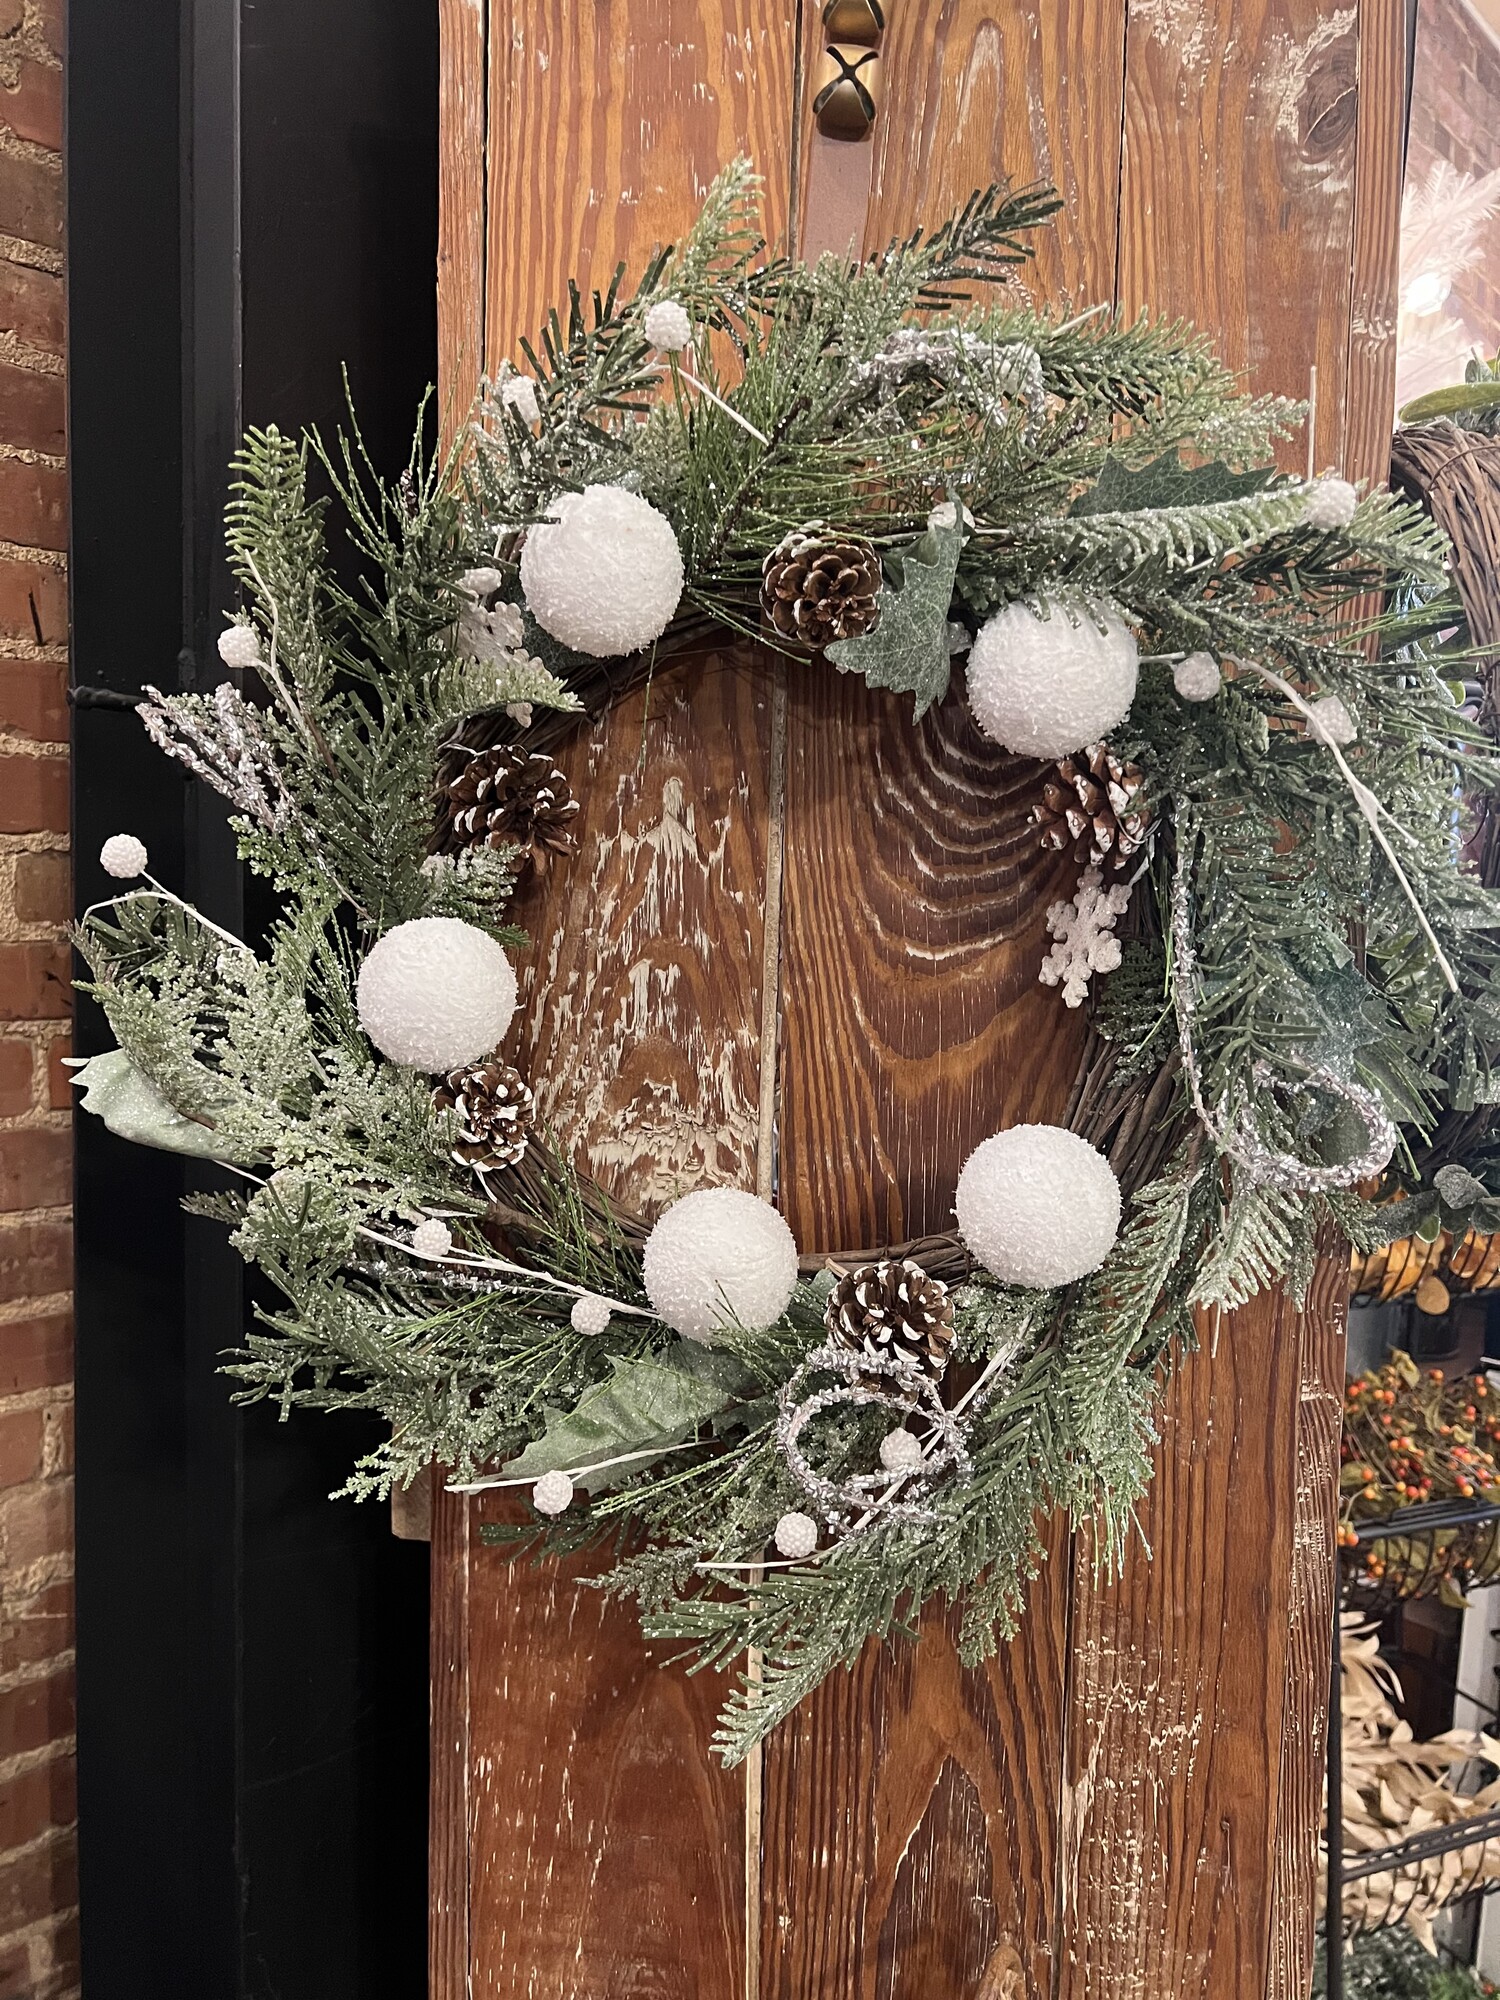 The White Christmas Wreath is the perfect wreath for a warm and inviting wintertime display. Freaturing artificial florals set on a natural grapevine base this wreath has been coated in glistening glitter for a snowy appearance. It is accented by pinecones, styrofoam balls and wooden snowflakes and will look charming in an entryway or front door. Measures 24 inches in diameter